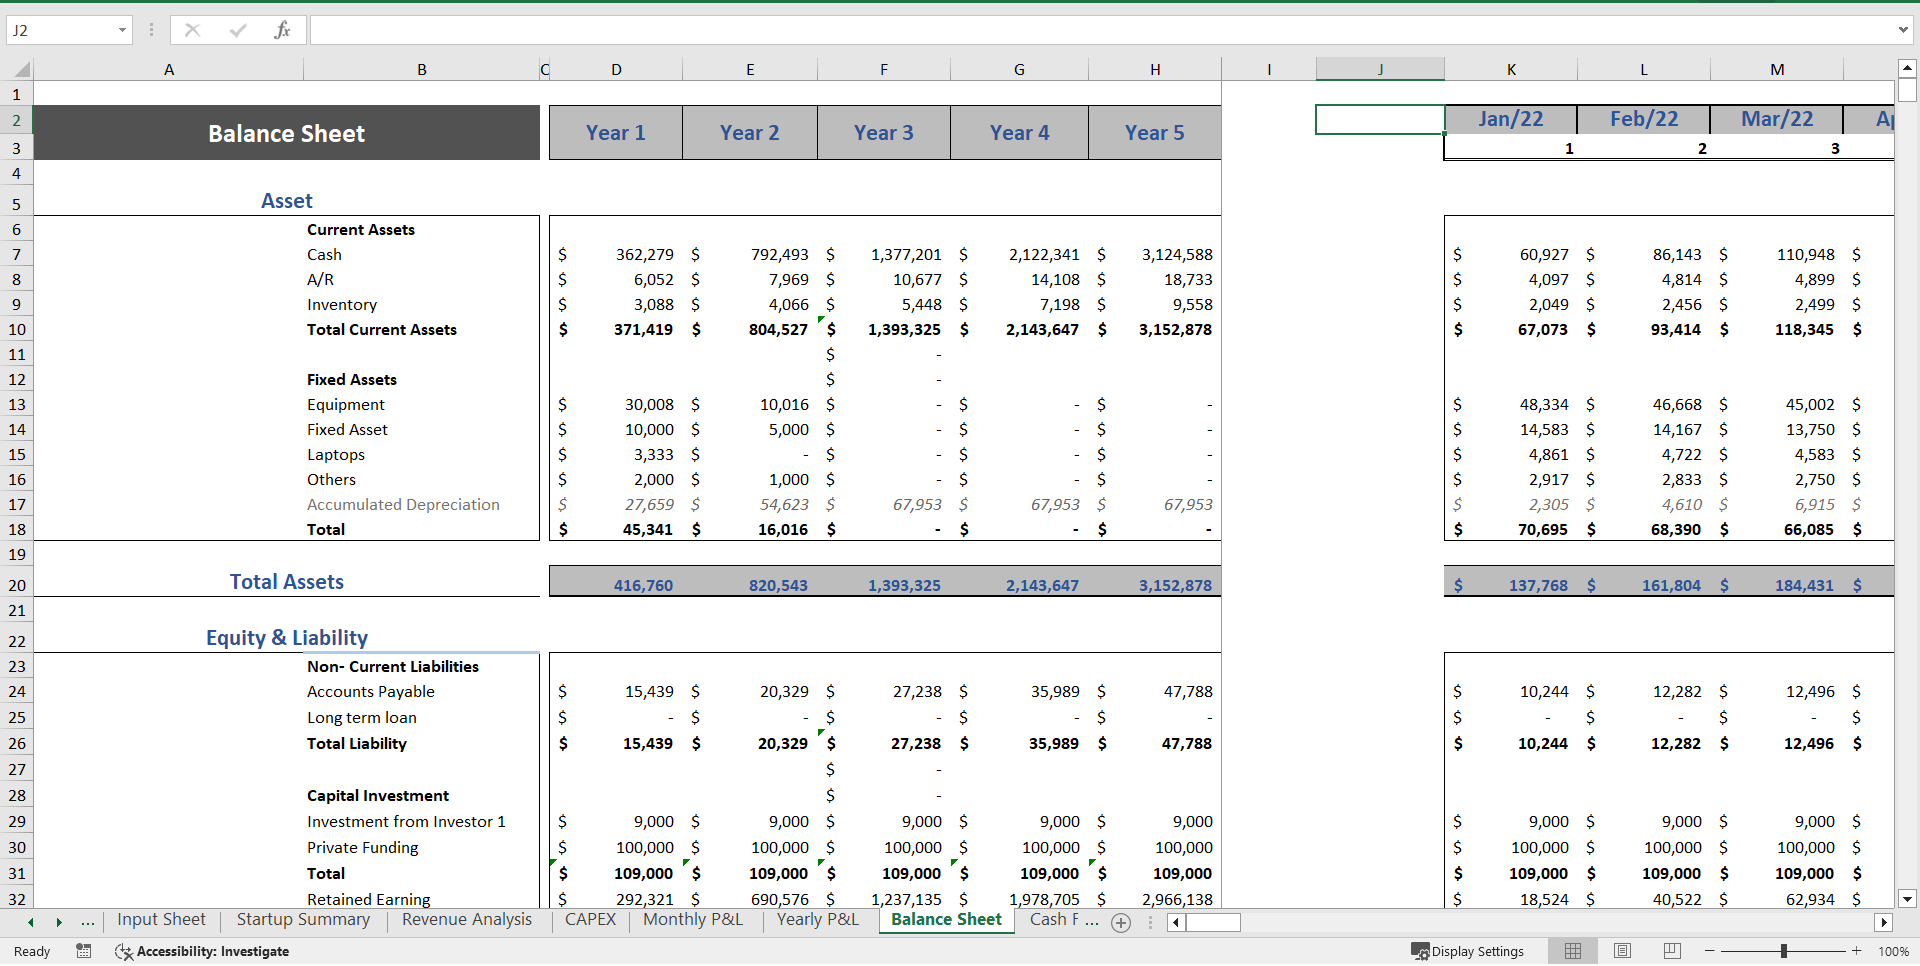 Furniture Store Excel Financial Model (Excel template (XLSX)) Preview Image